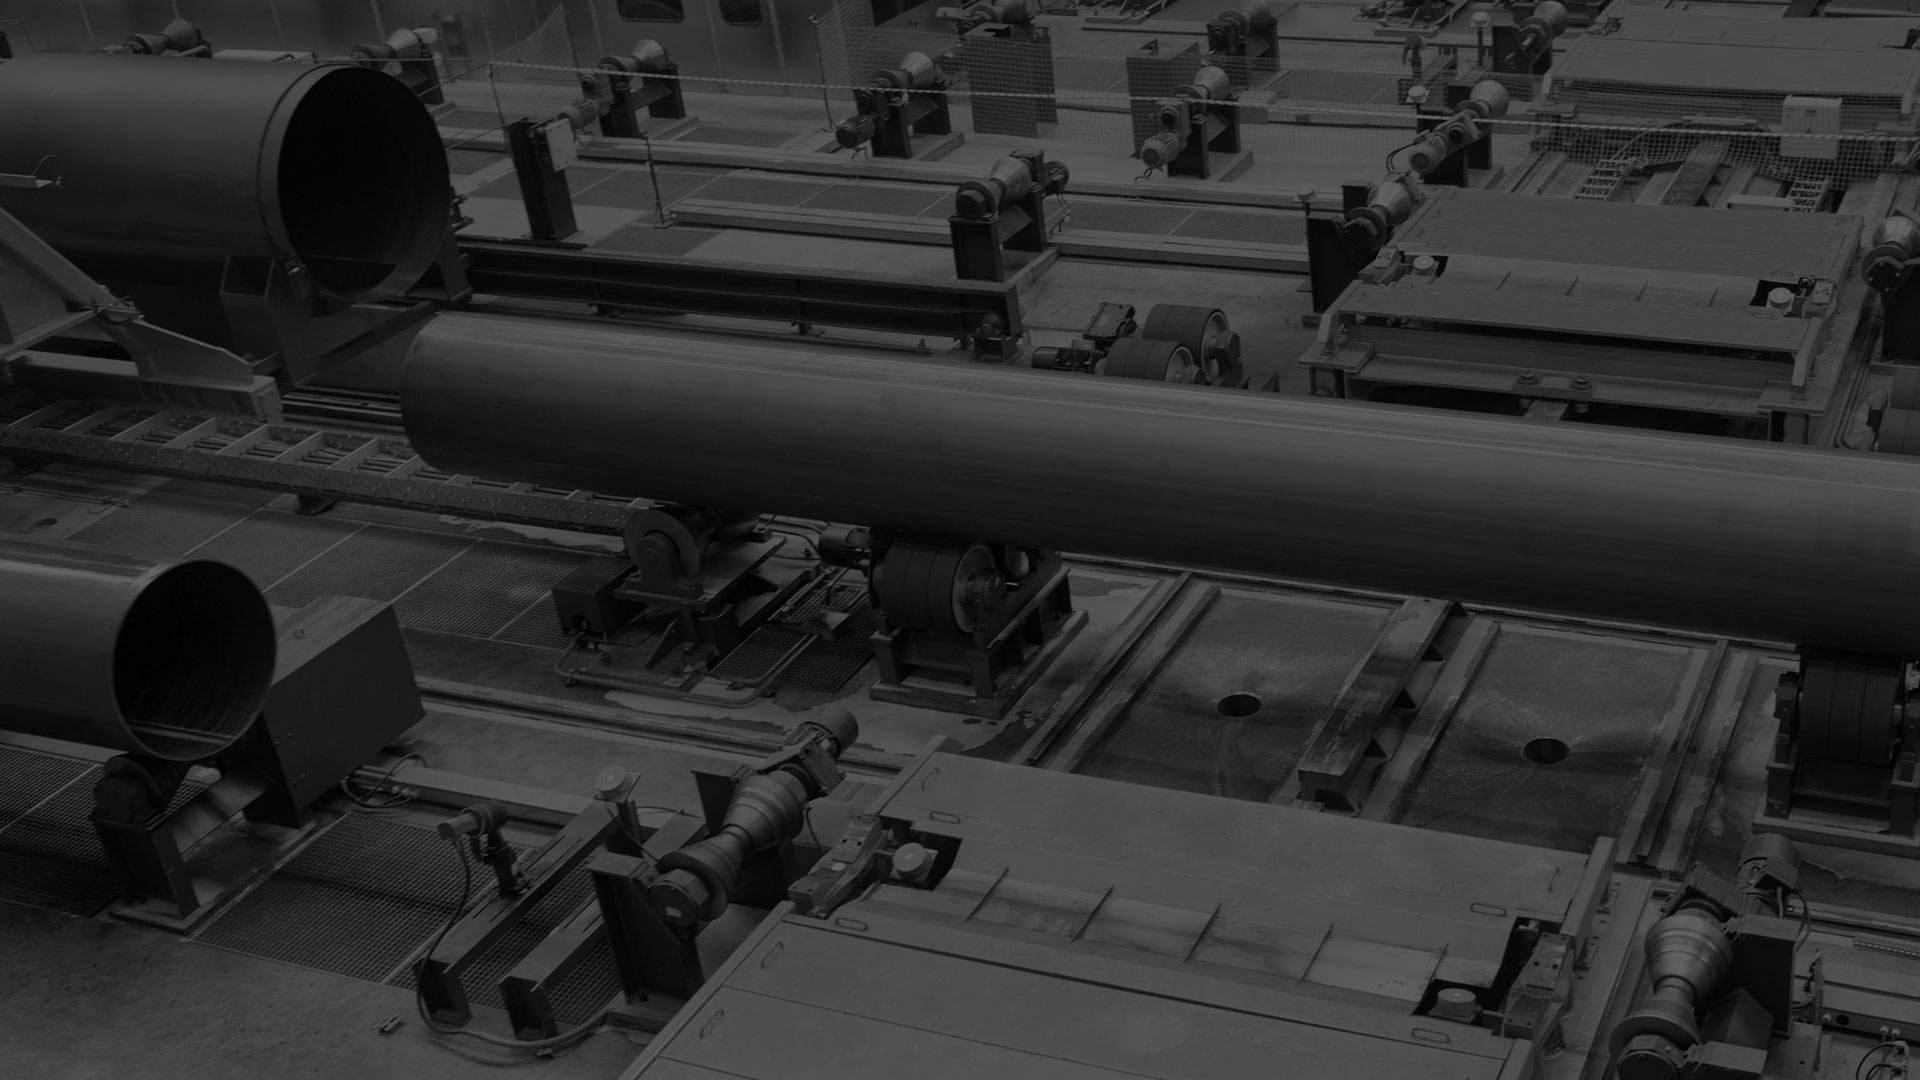 A darkened black and white image of a custom fabrication being manufacturer.